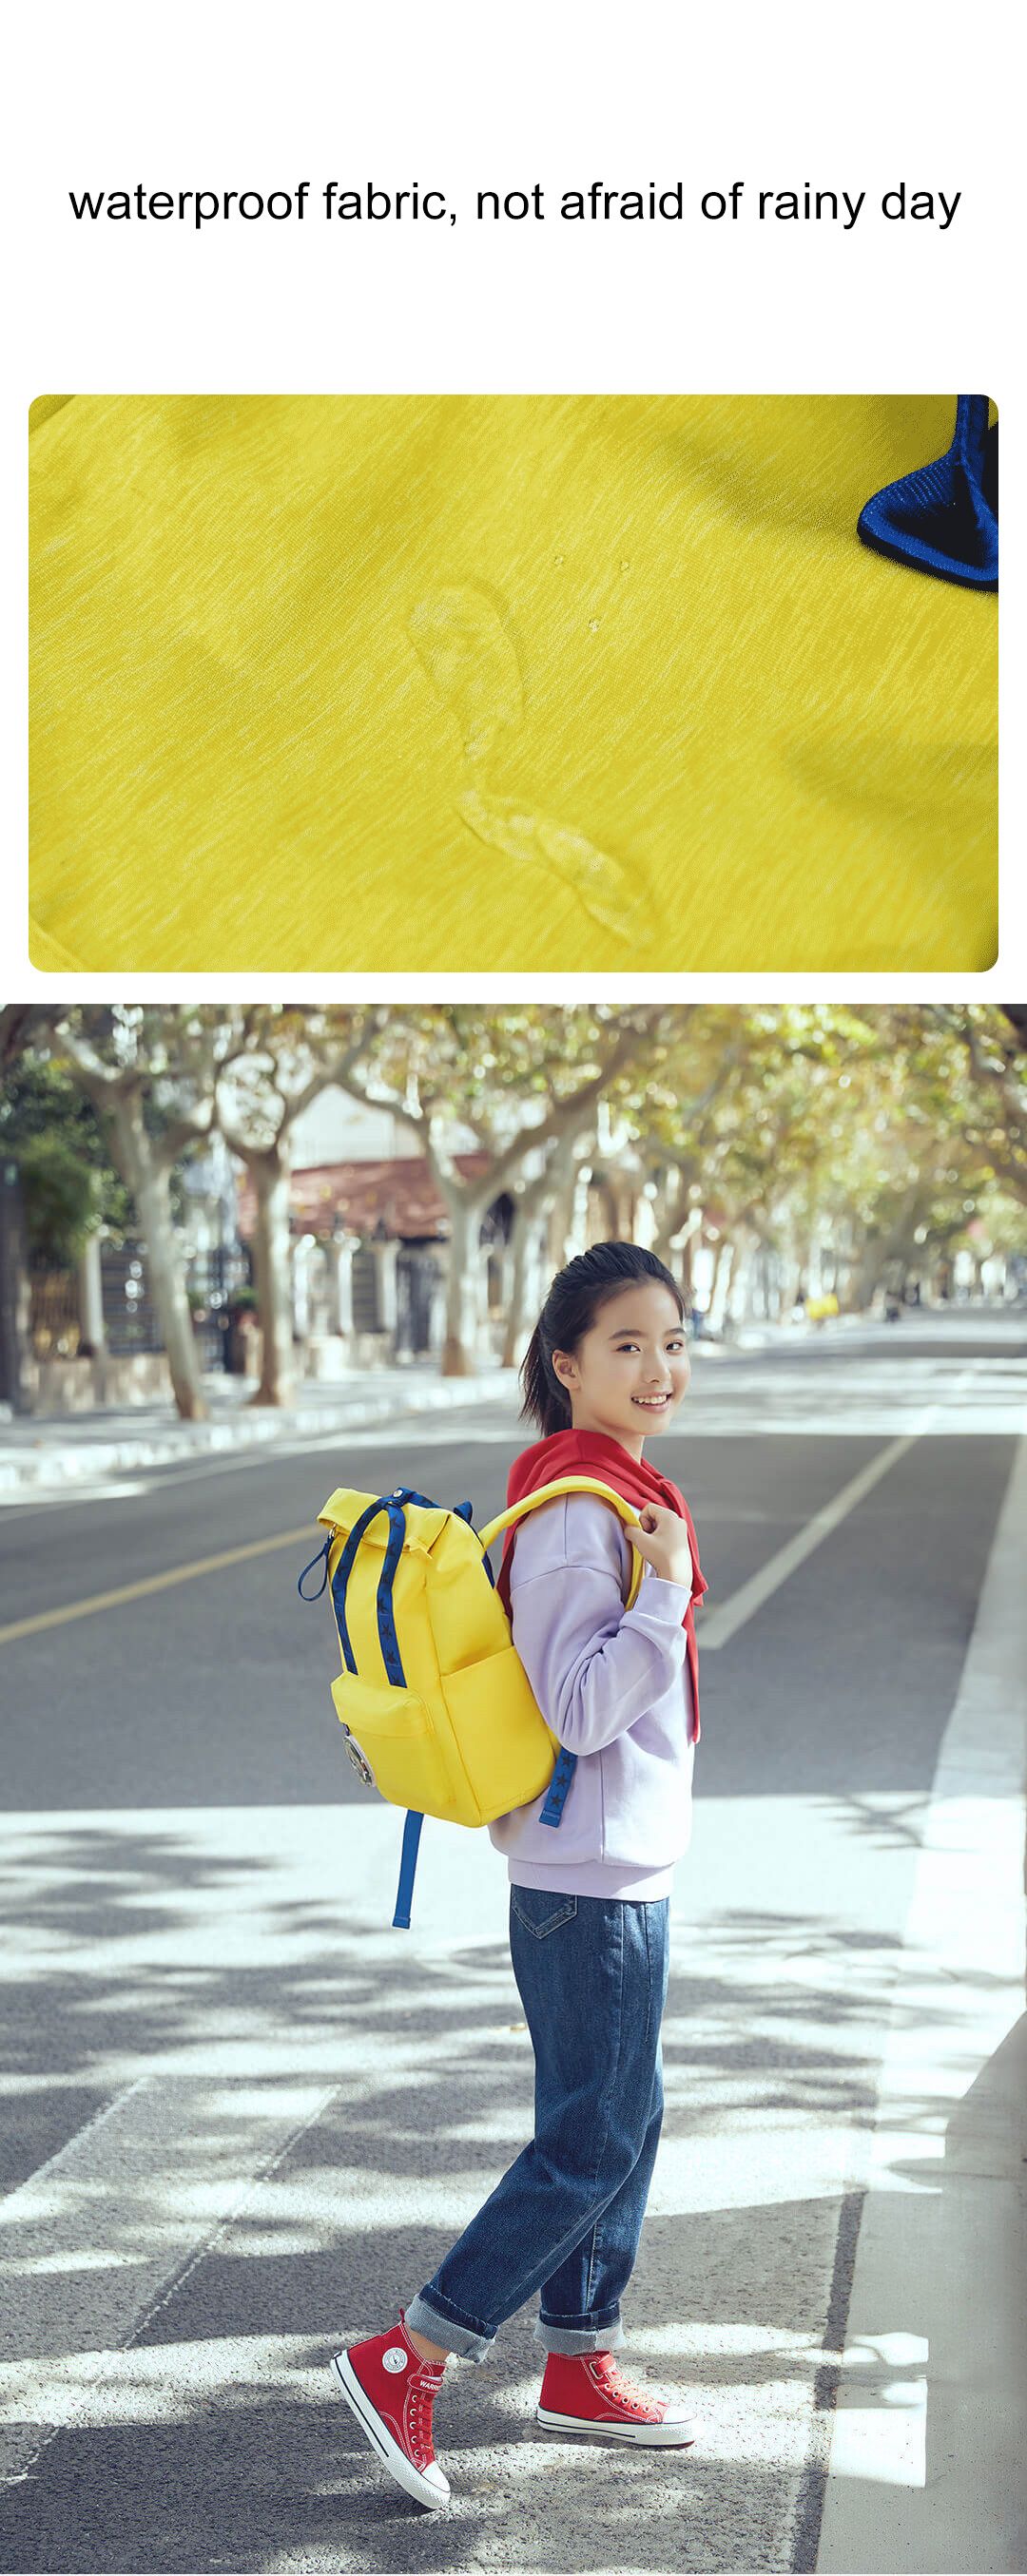 Yang-Rolled-Fun-Casual-Backpack-Waterproof-Student-Schoolbag-with-Reflective-Strips-from-YOUPIN-1616412